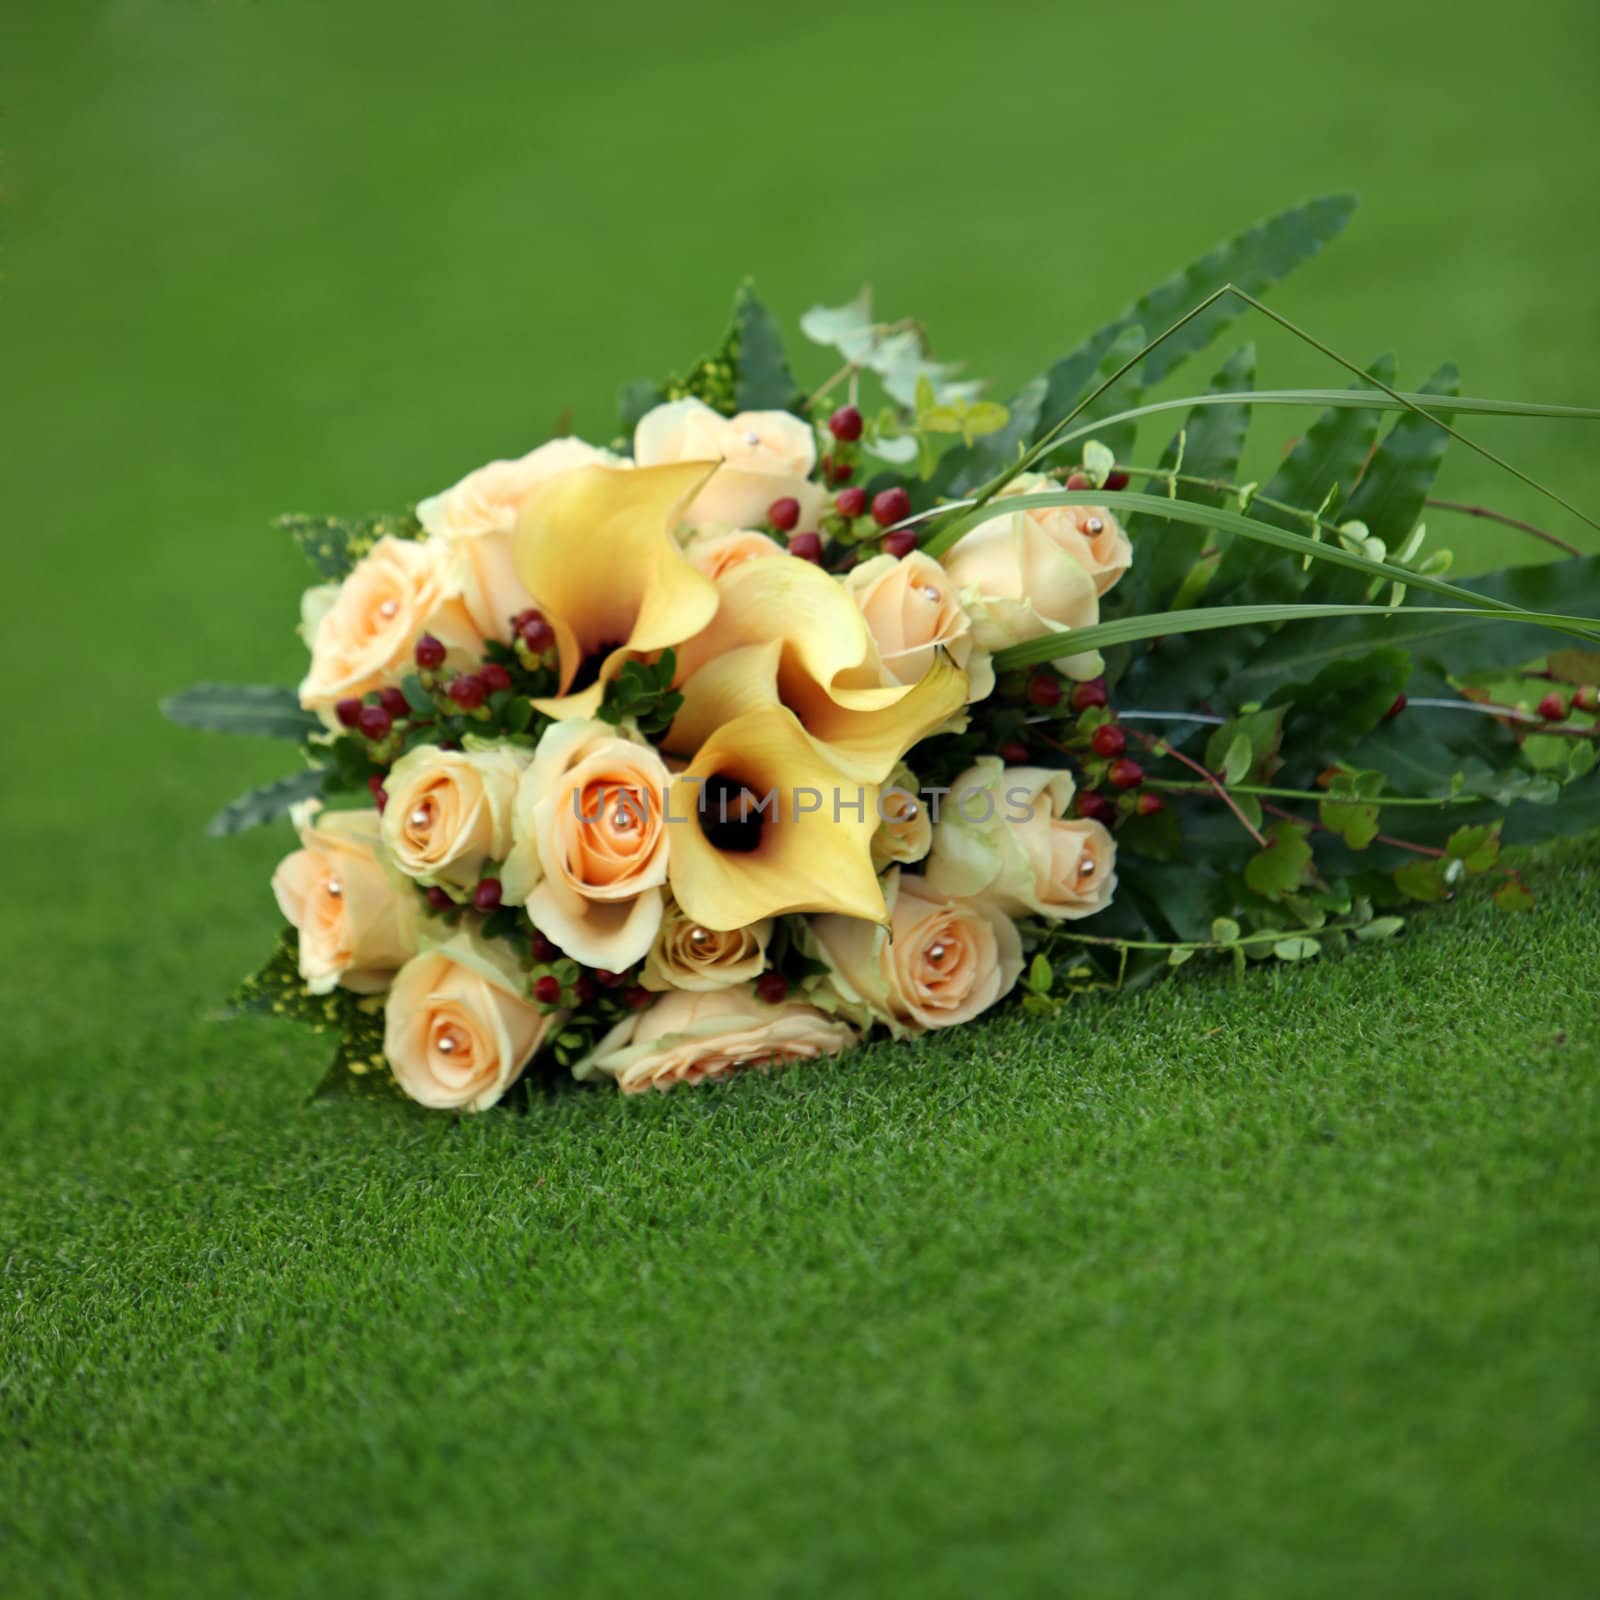  Bouquet of yellow callas and roses by Farina6000